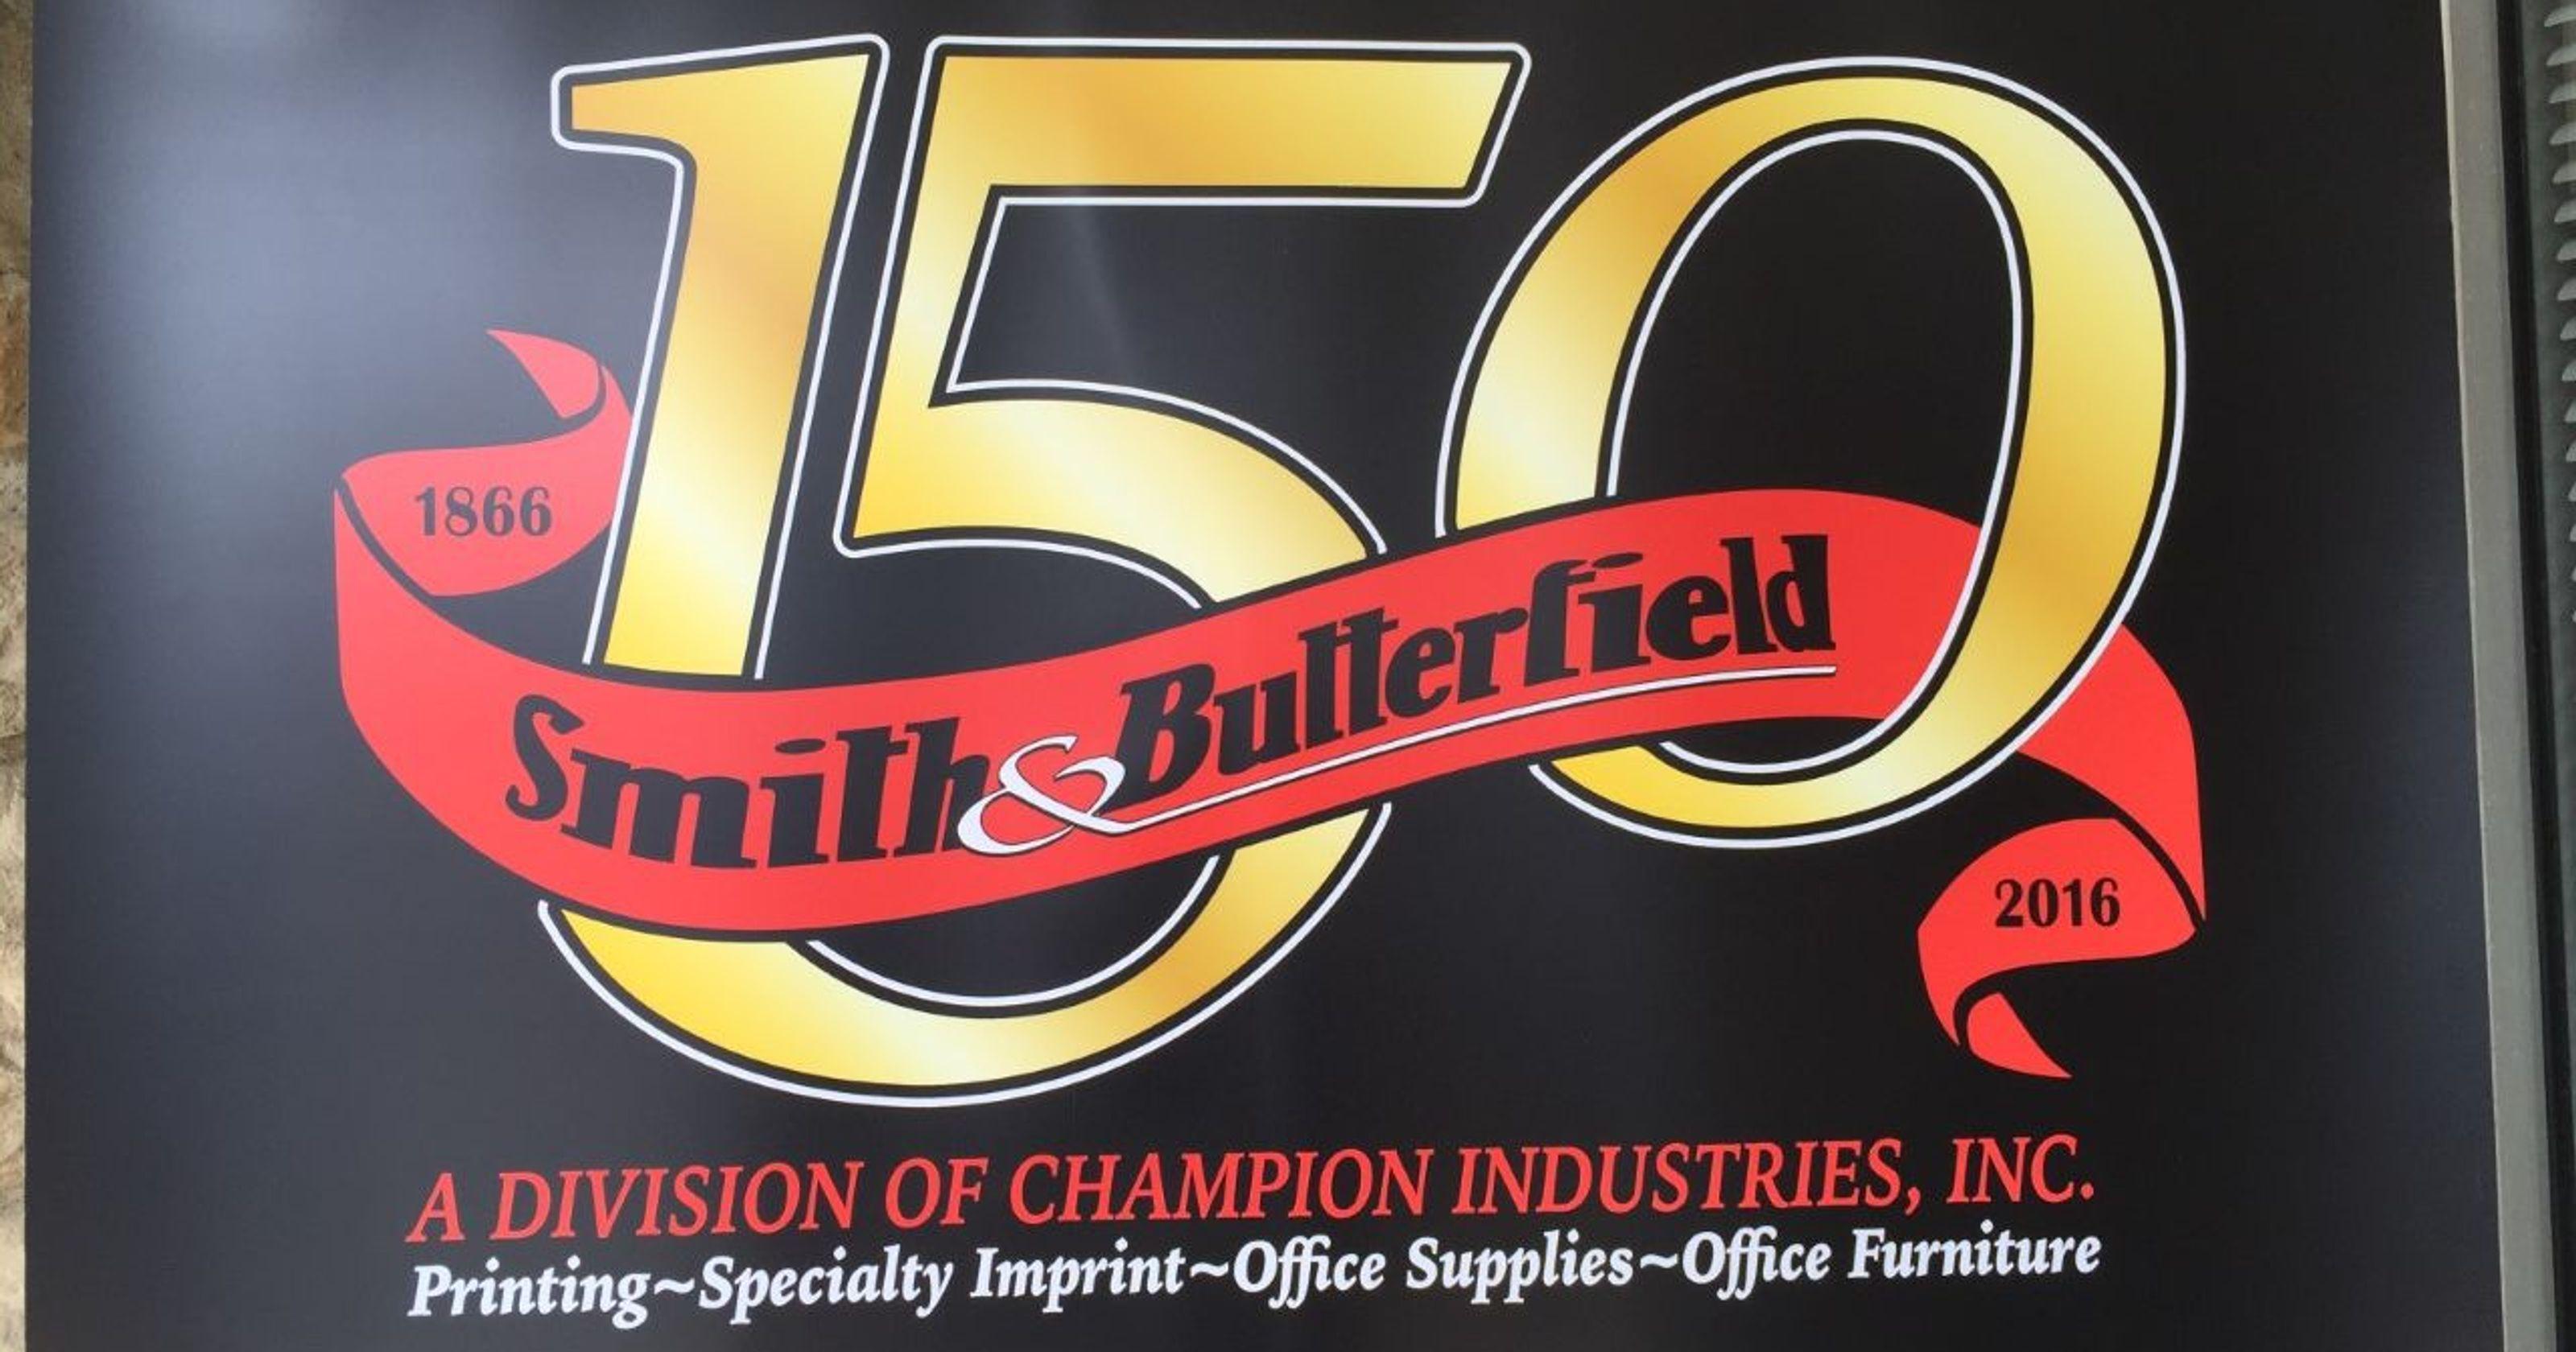 Champion Industries Logo - Smith & Butterfield celebrates 150 years